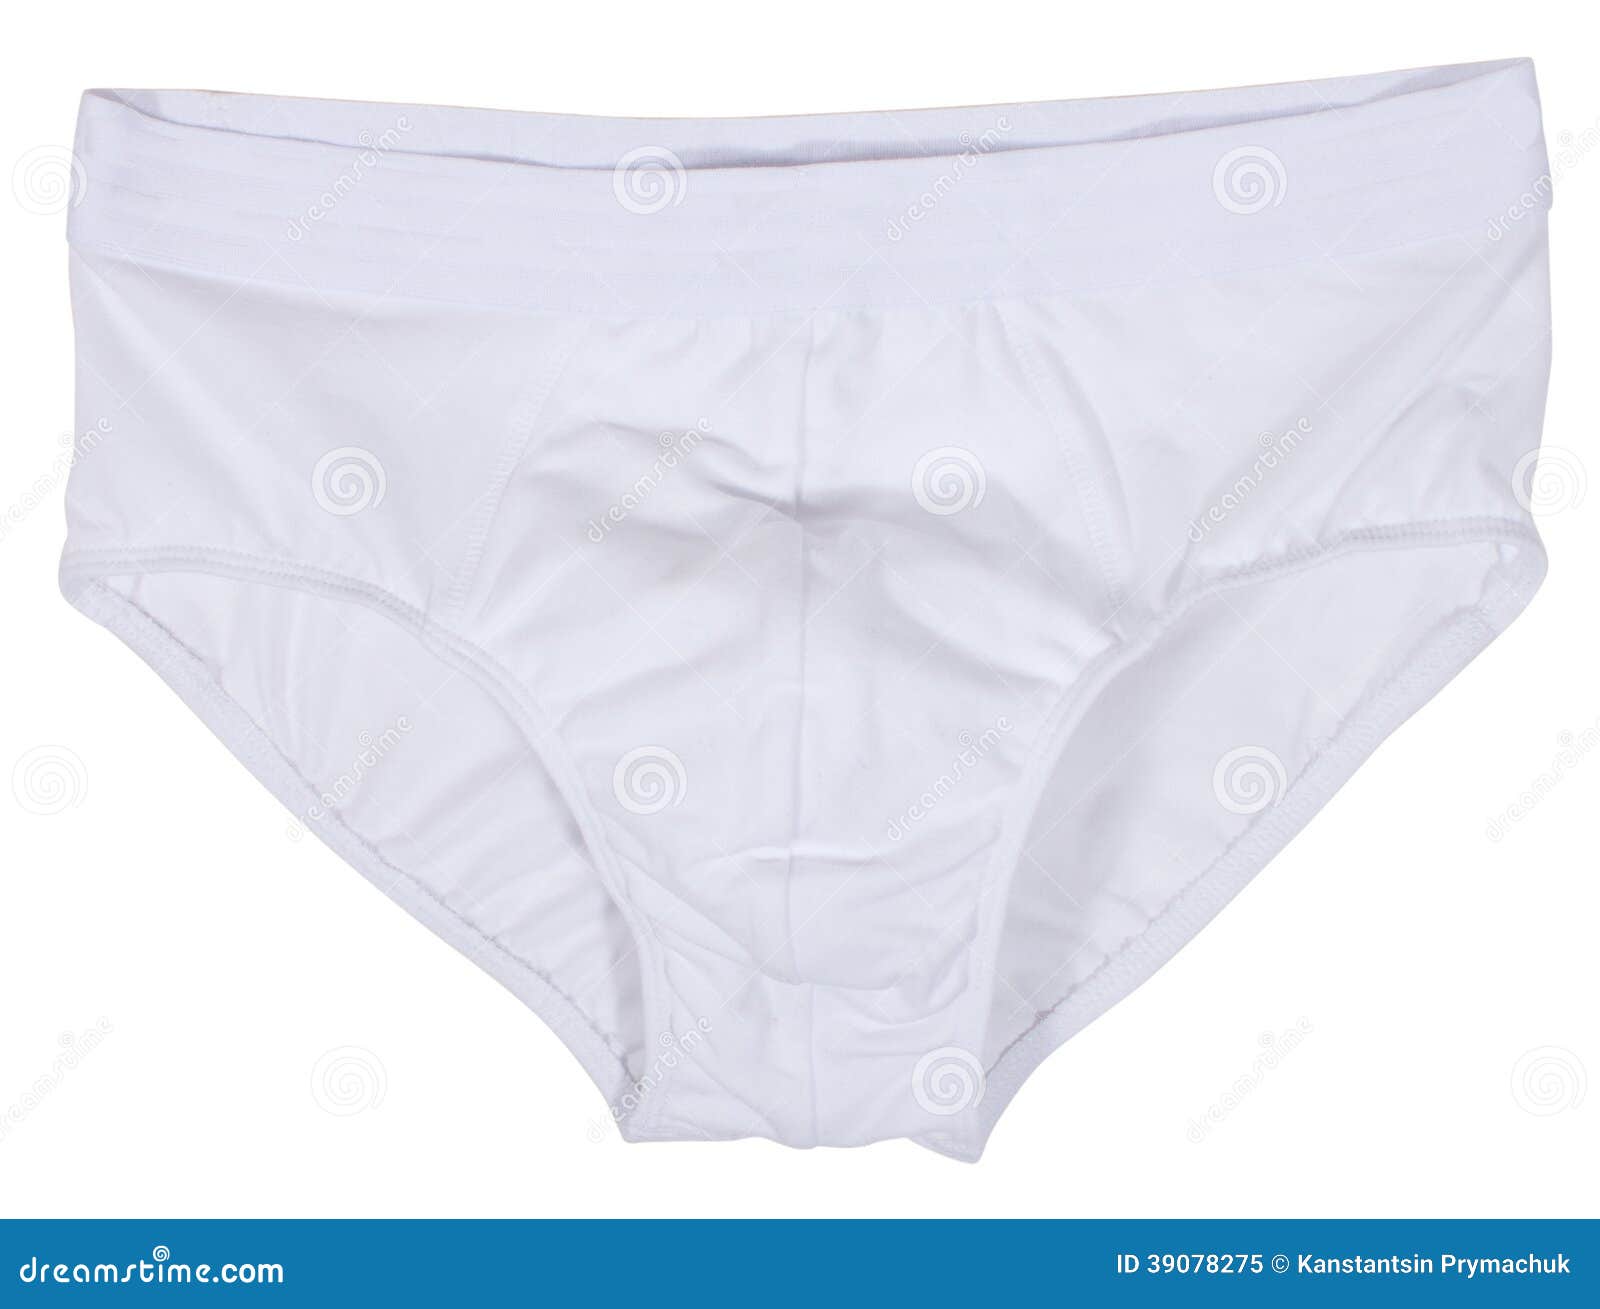 Male Underwear Isolated on White Stock Image - Image of colorful ...